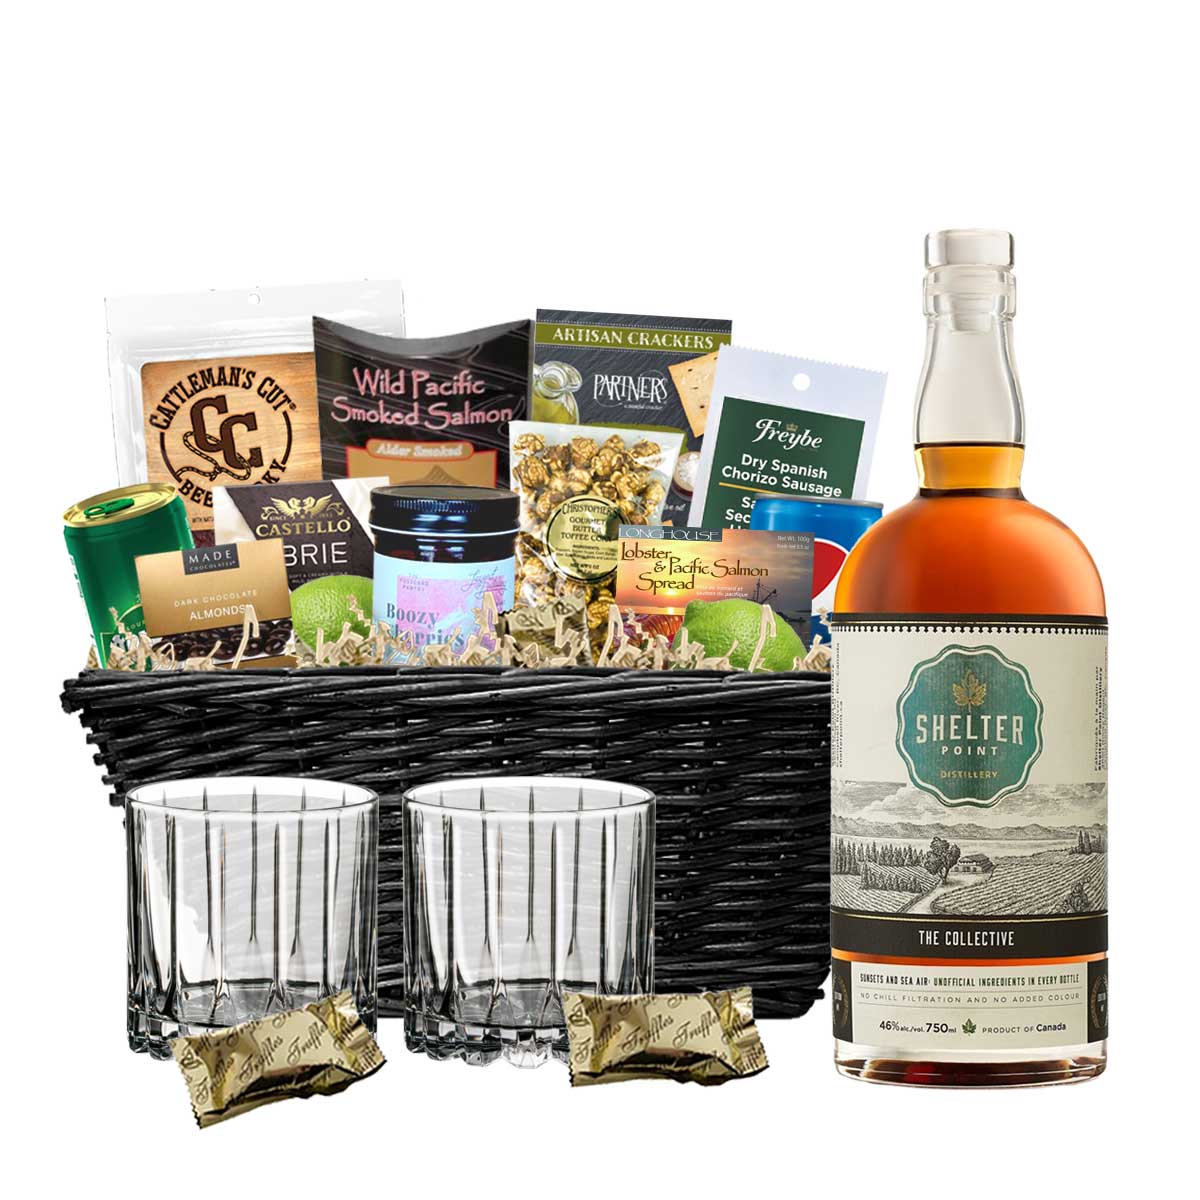 TAG Liquor Stores BC - Shelter Point The Collective Whisky 750ml Gift Basket